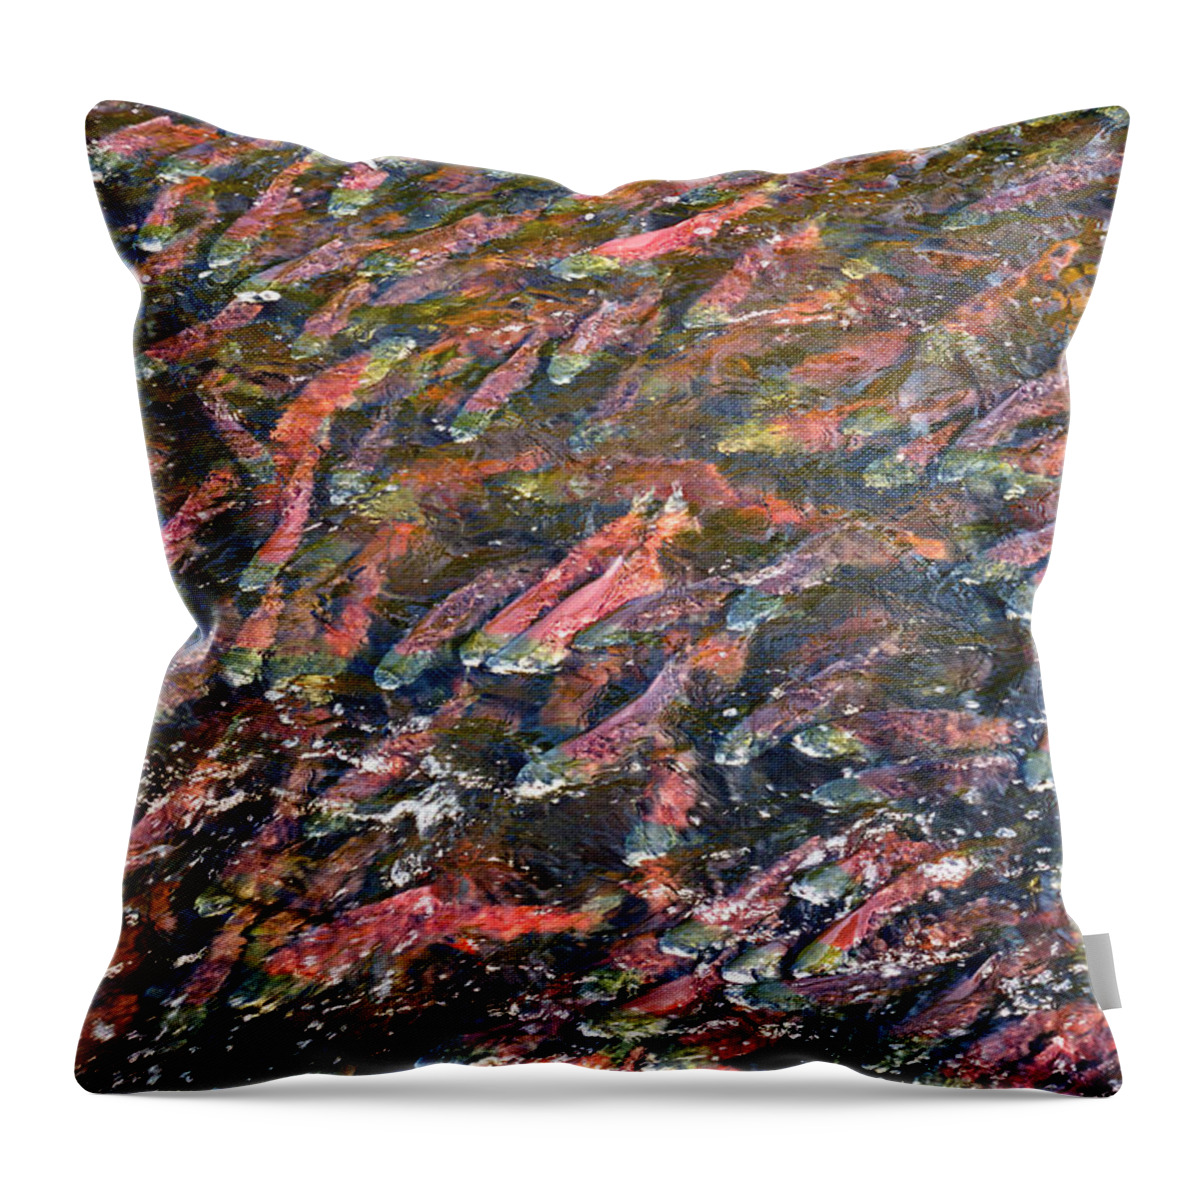 Fish Throw Pillow featuring the photograph Salmon So Thick You Can Walk On Them by Mary Lee Dereske